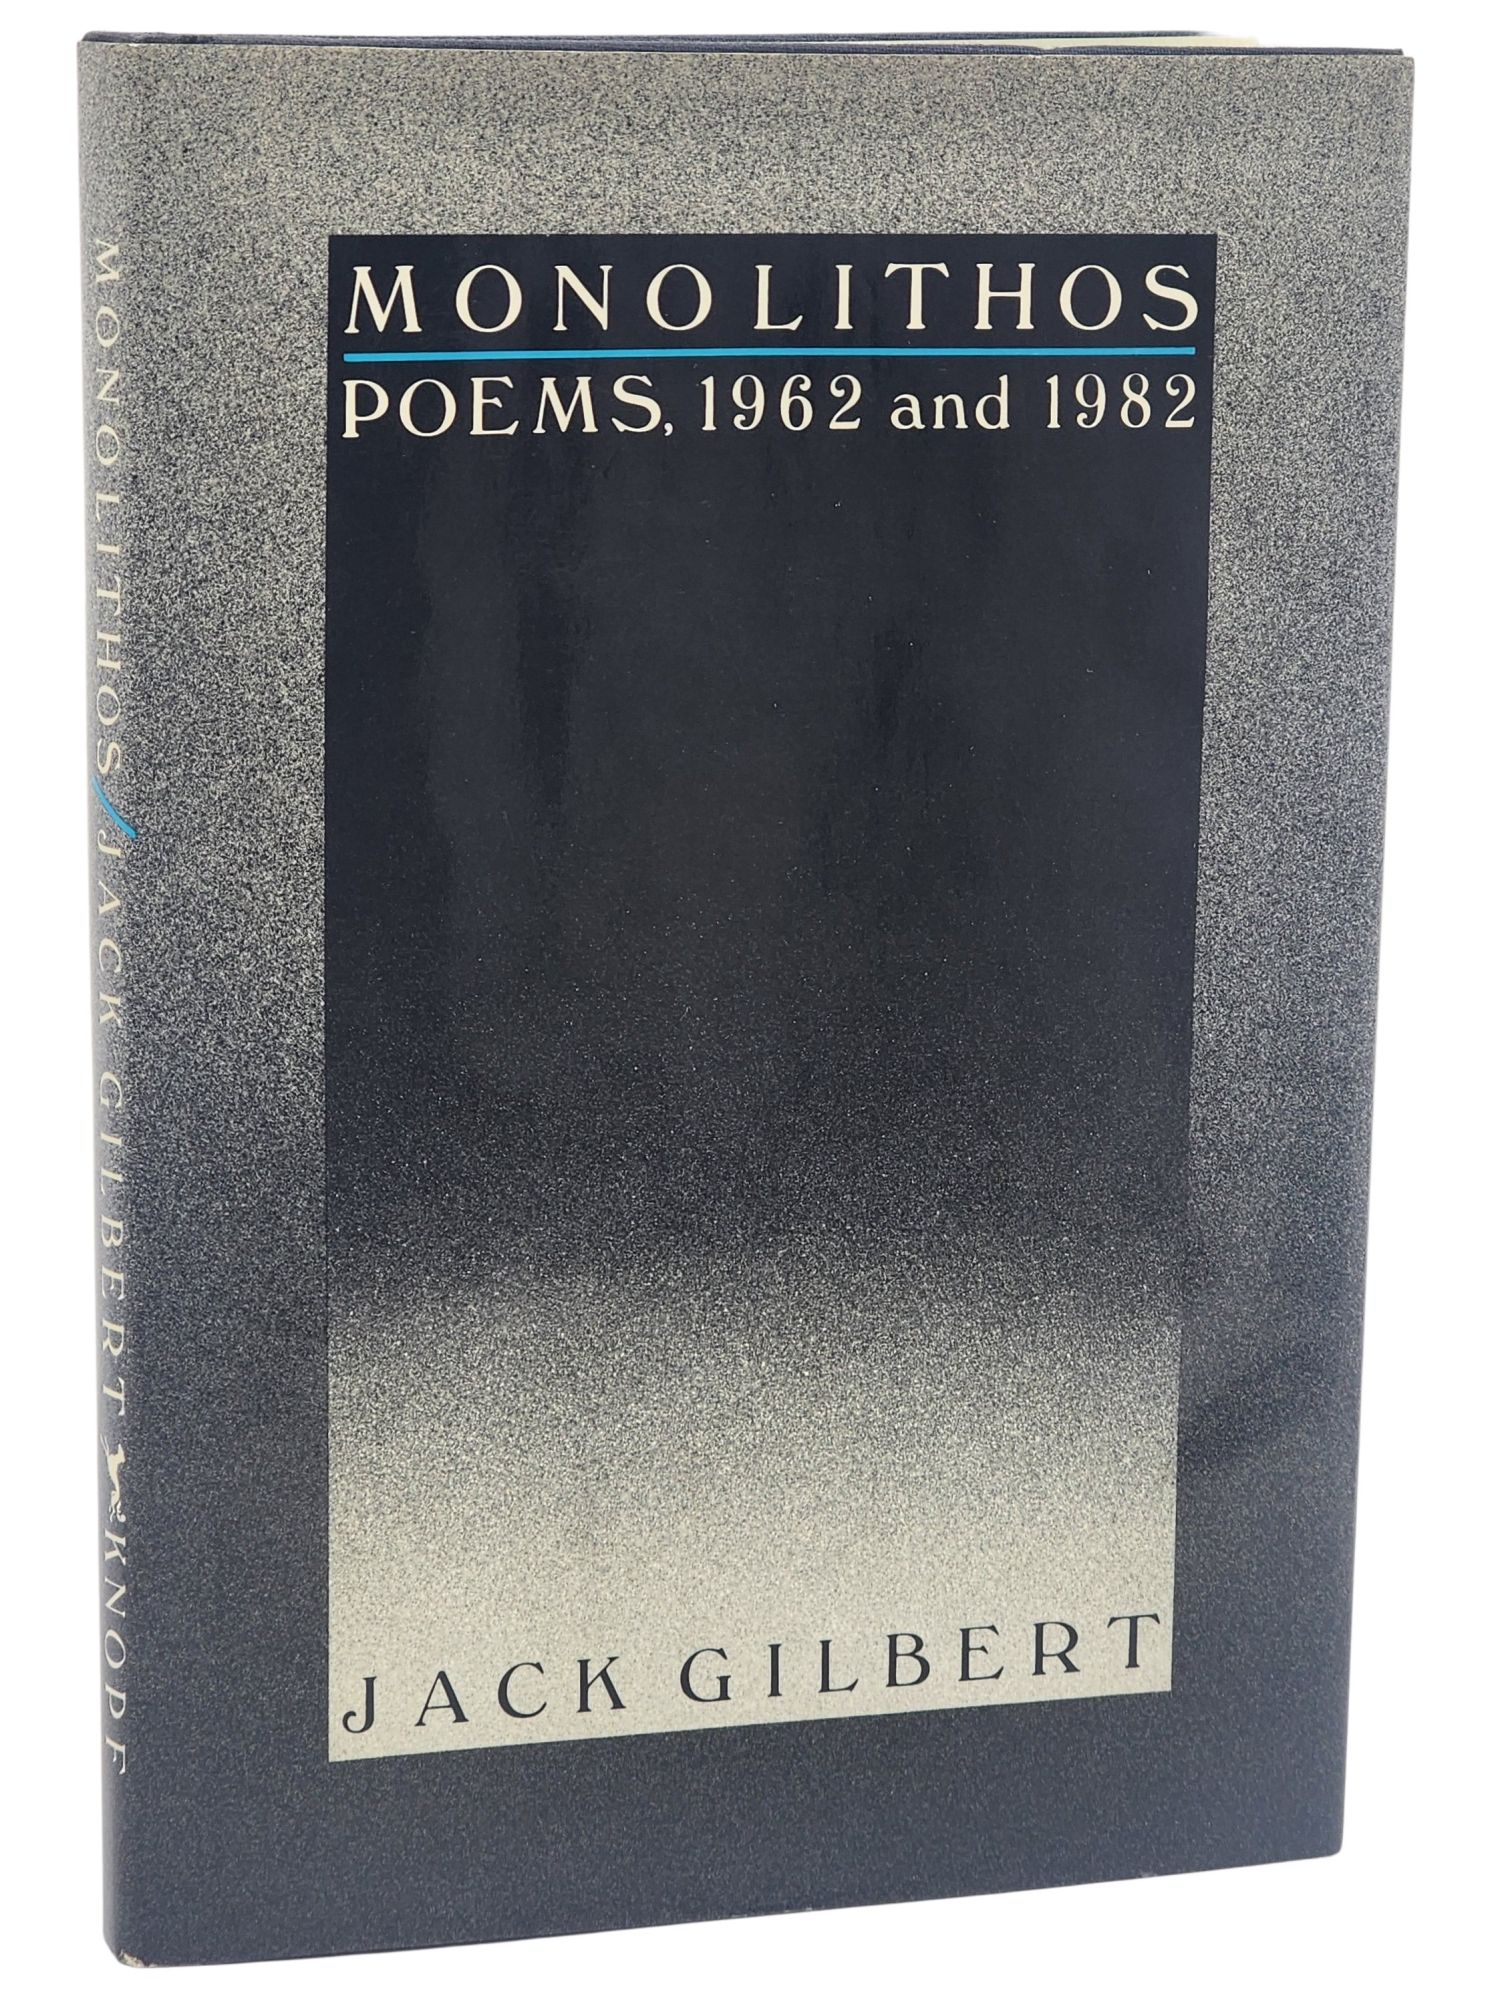 [Book #27067] MONOLITHOS. Poems, 1962 and 1982. Jack Gilbert.